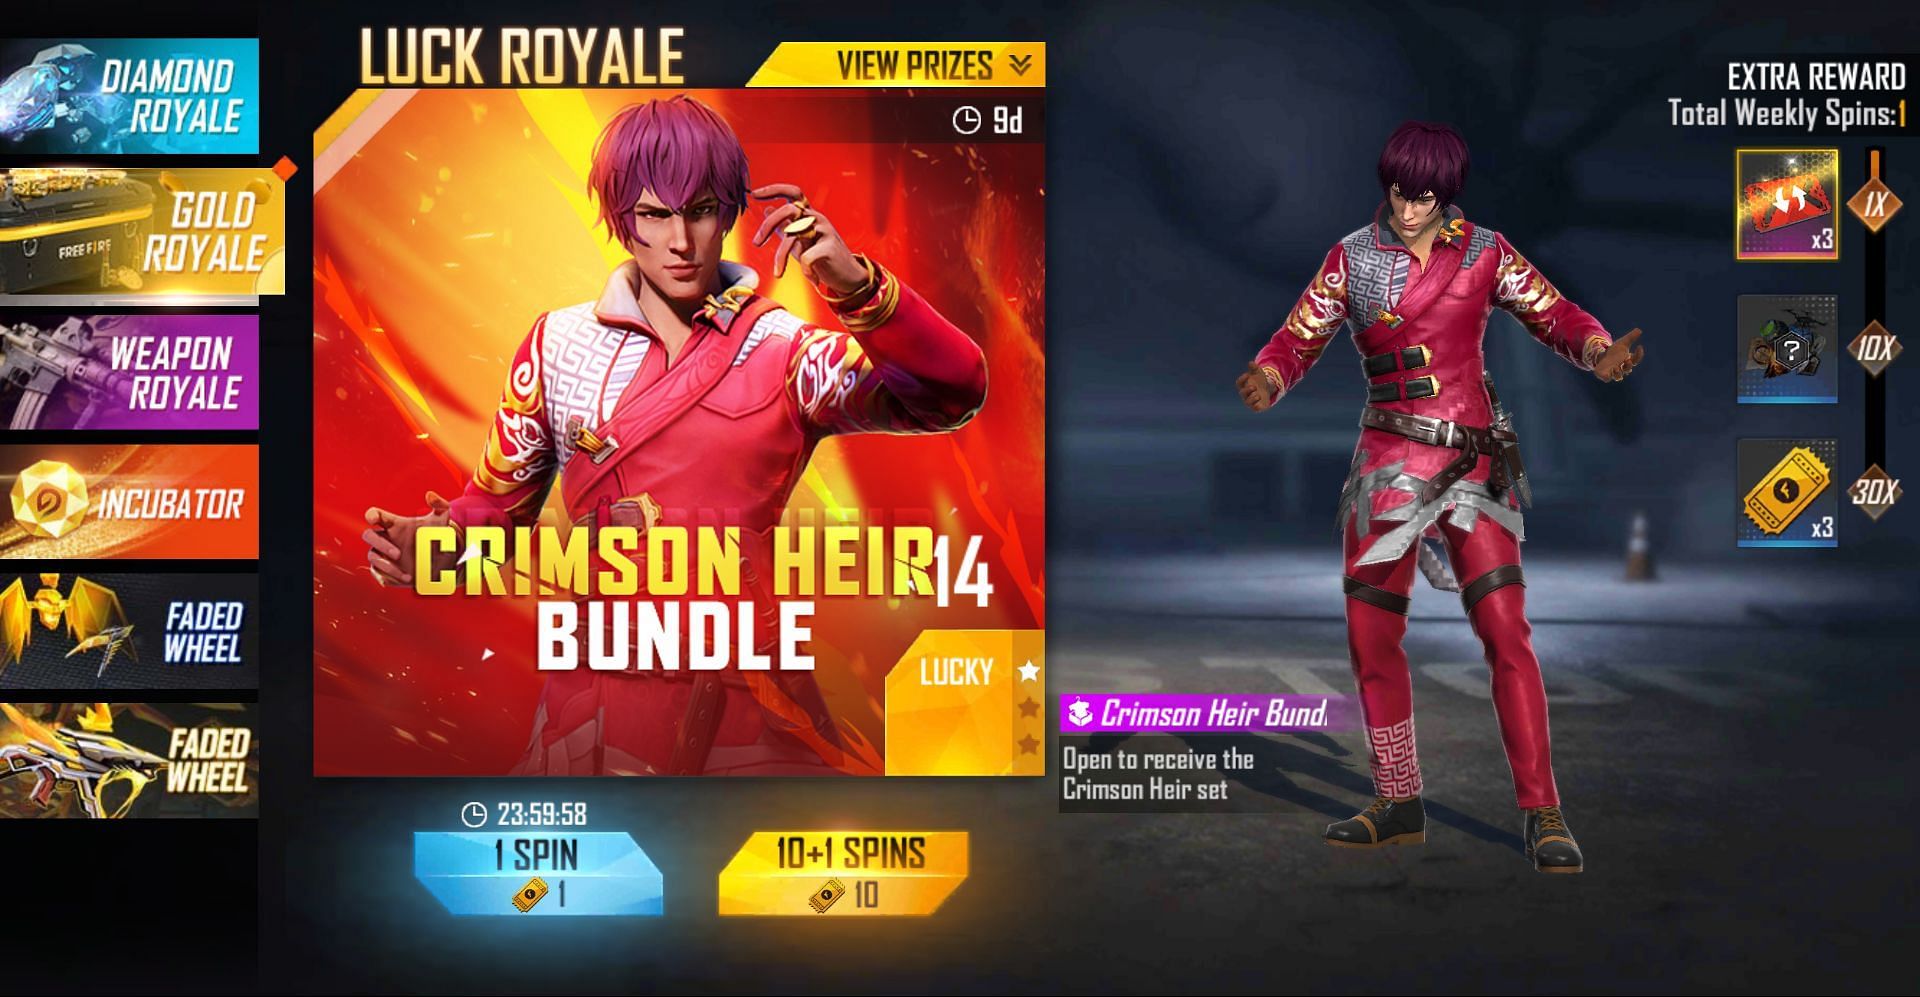 The Gold Royale ends in nine days, i.e., 1 December (Image via Free Fire)